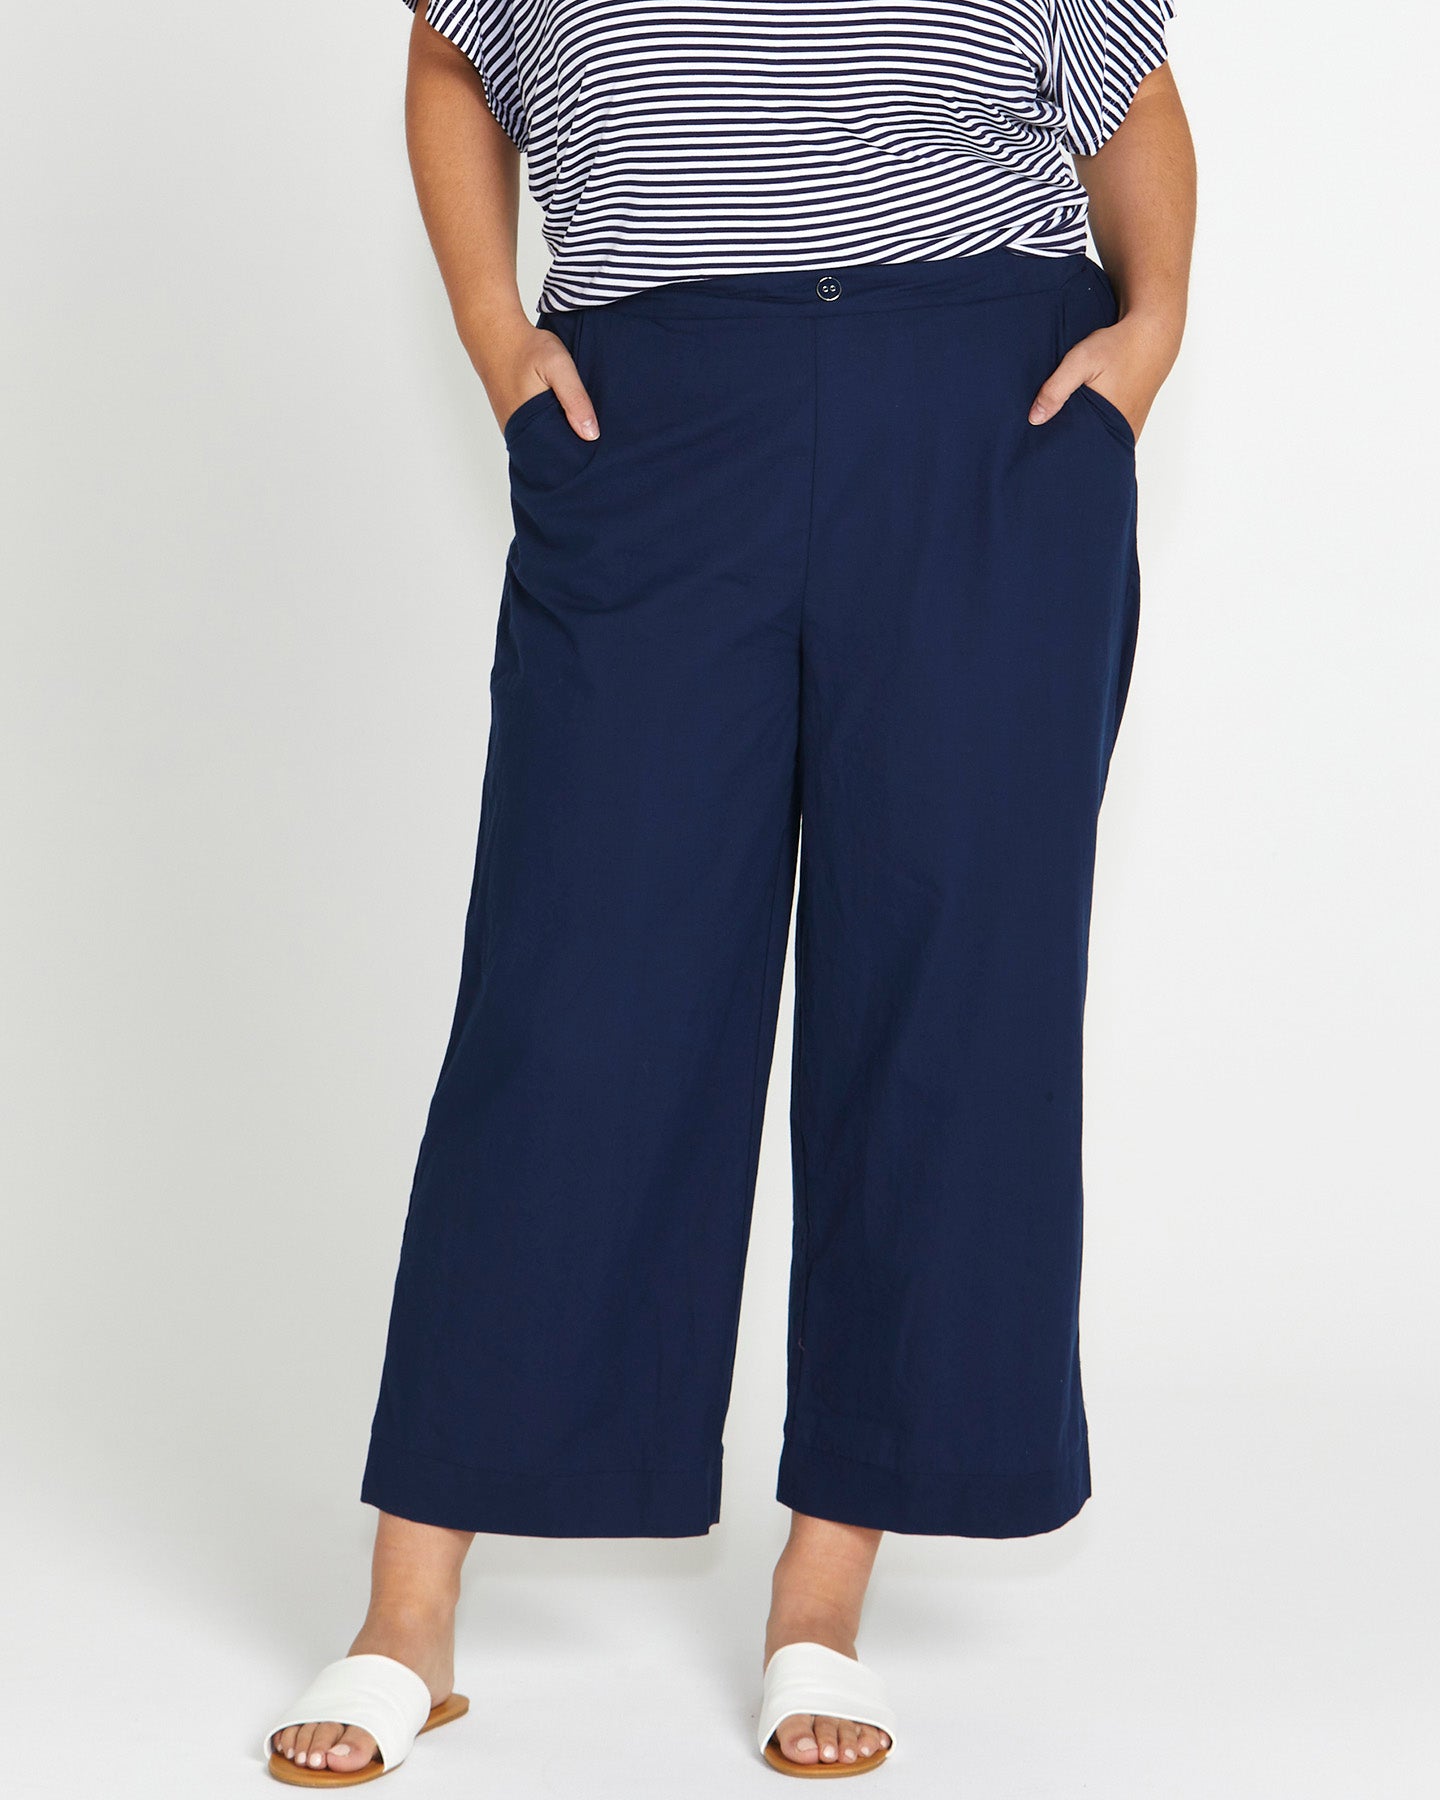 Montague High Waisted Straight Cropped Cotton Pants  - Navy